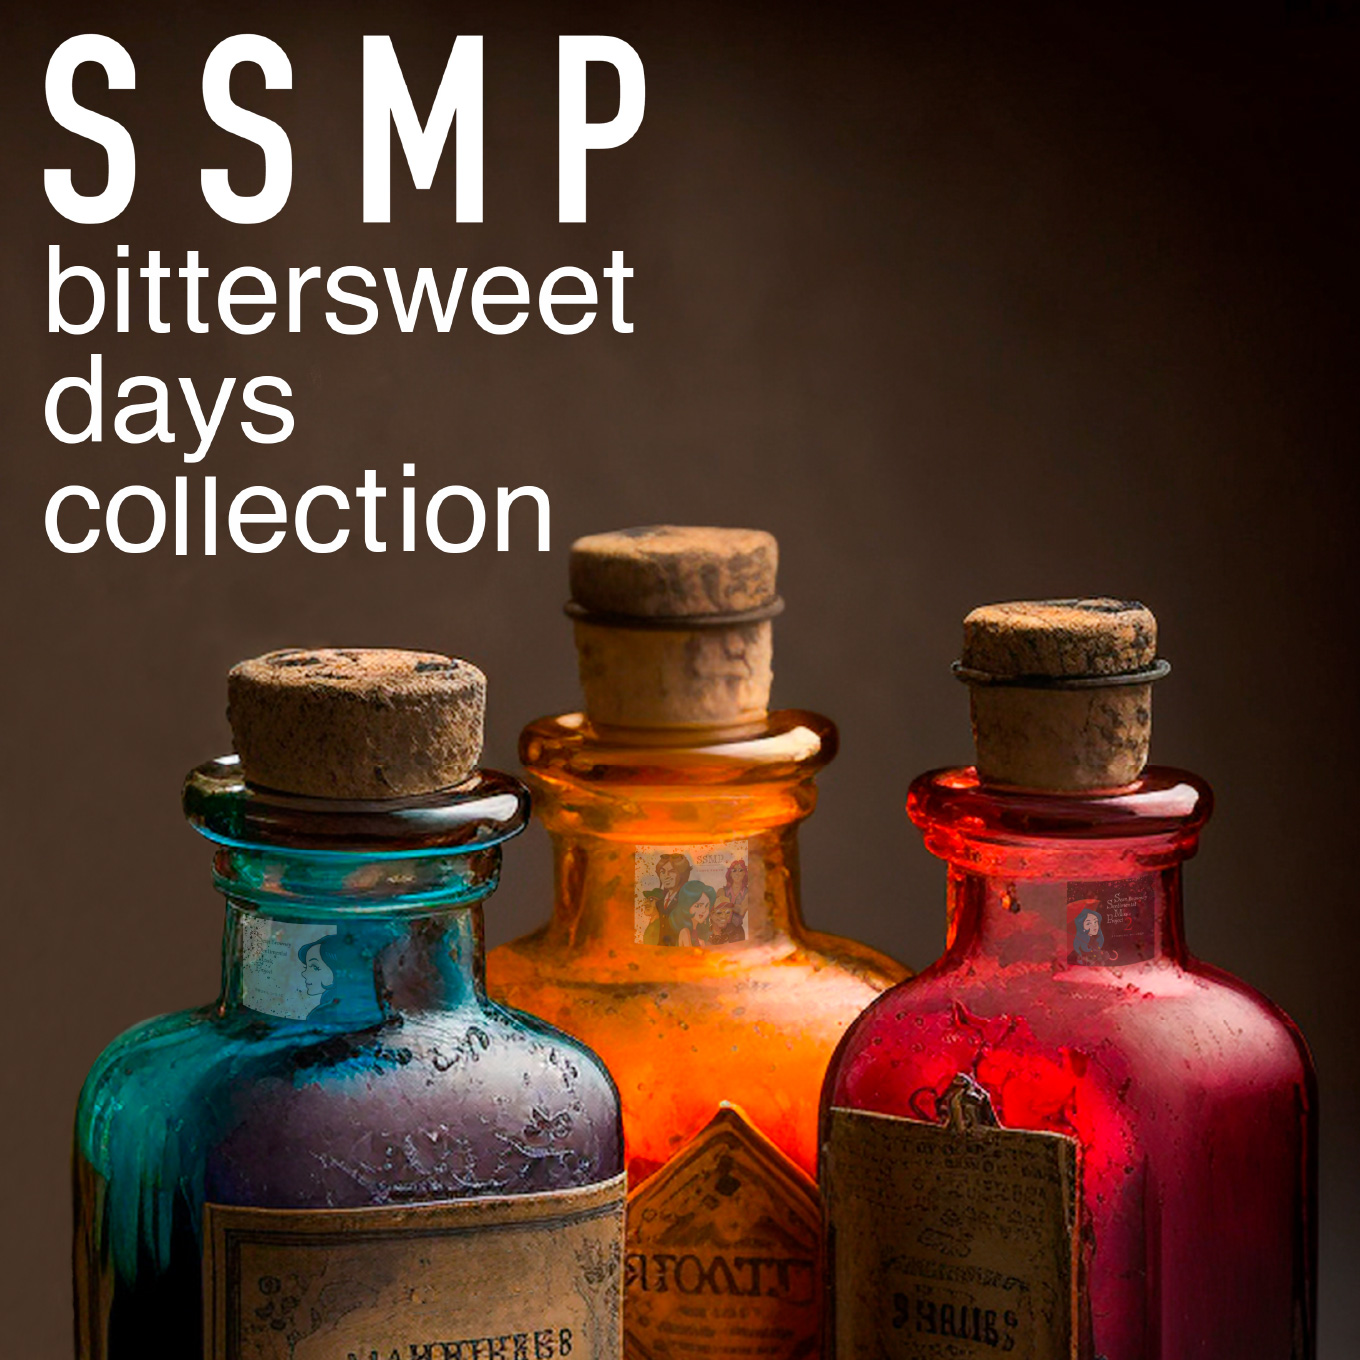 SSMP bittersweet days collection